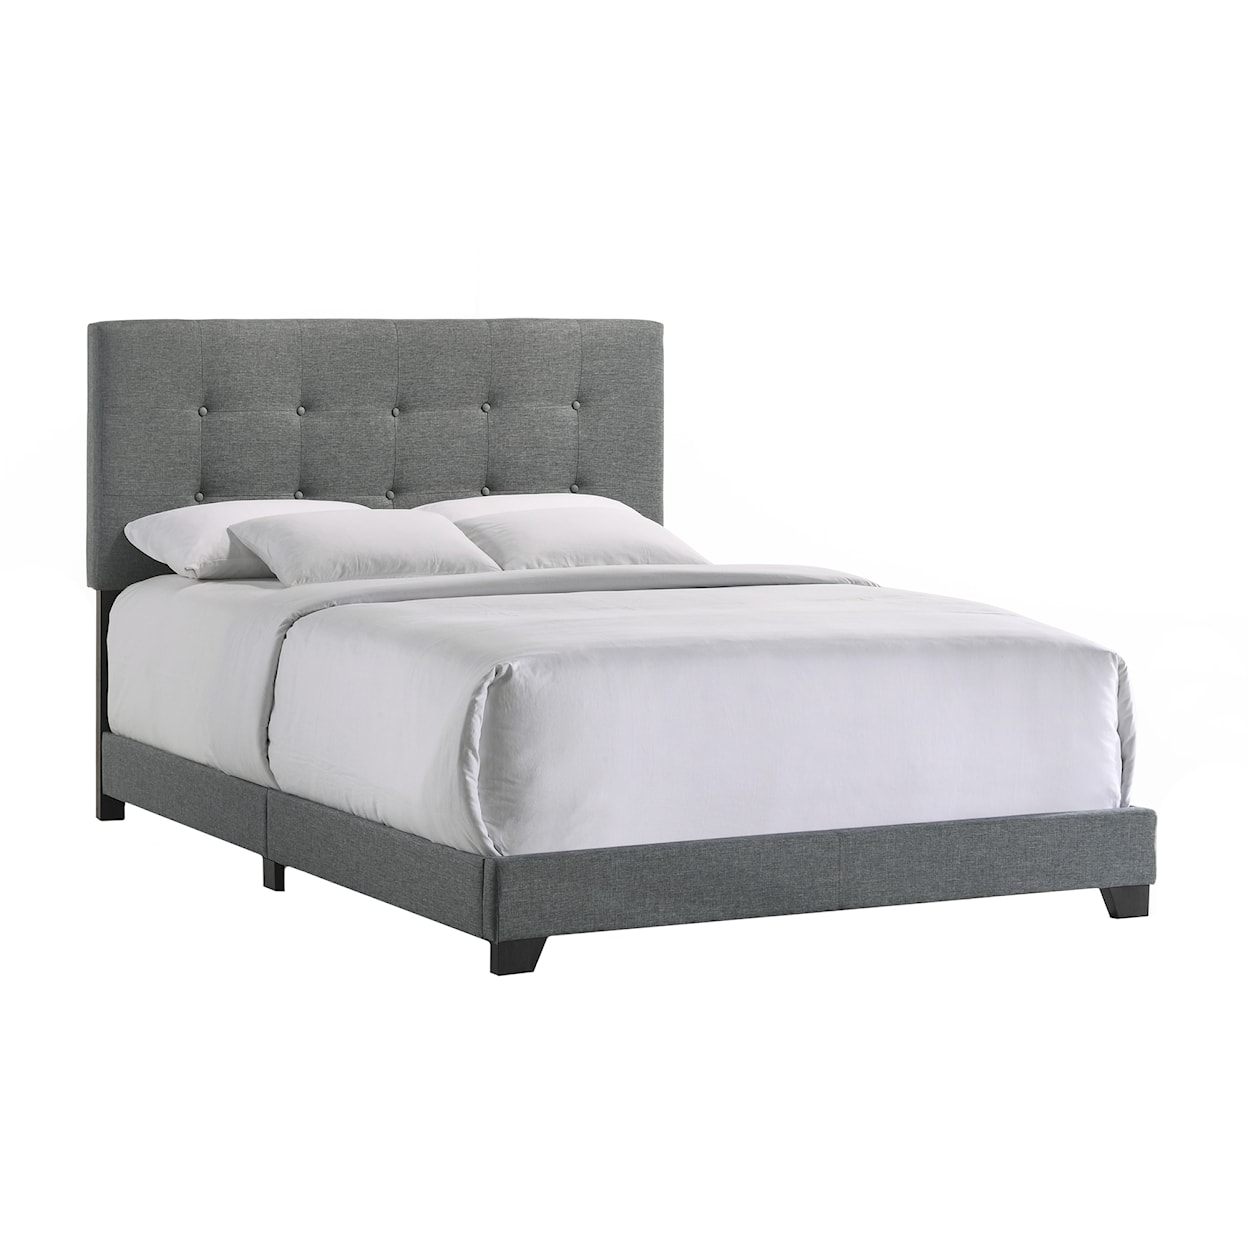 Intercon Upholstered Beds Addyson Queen Upholstered Bed